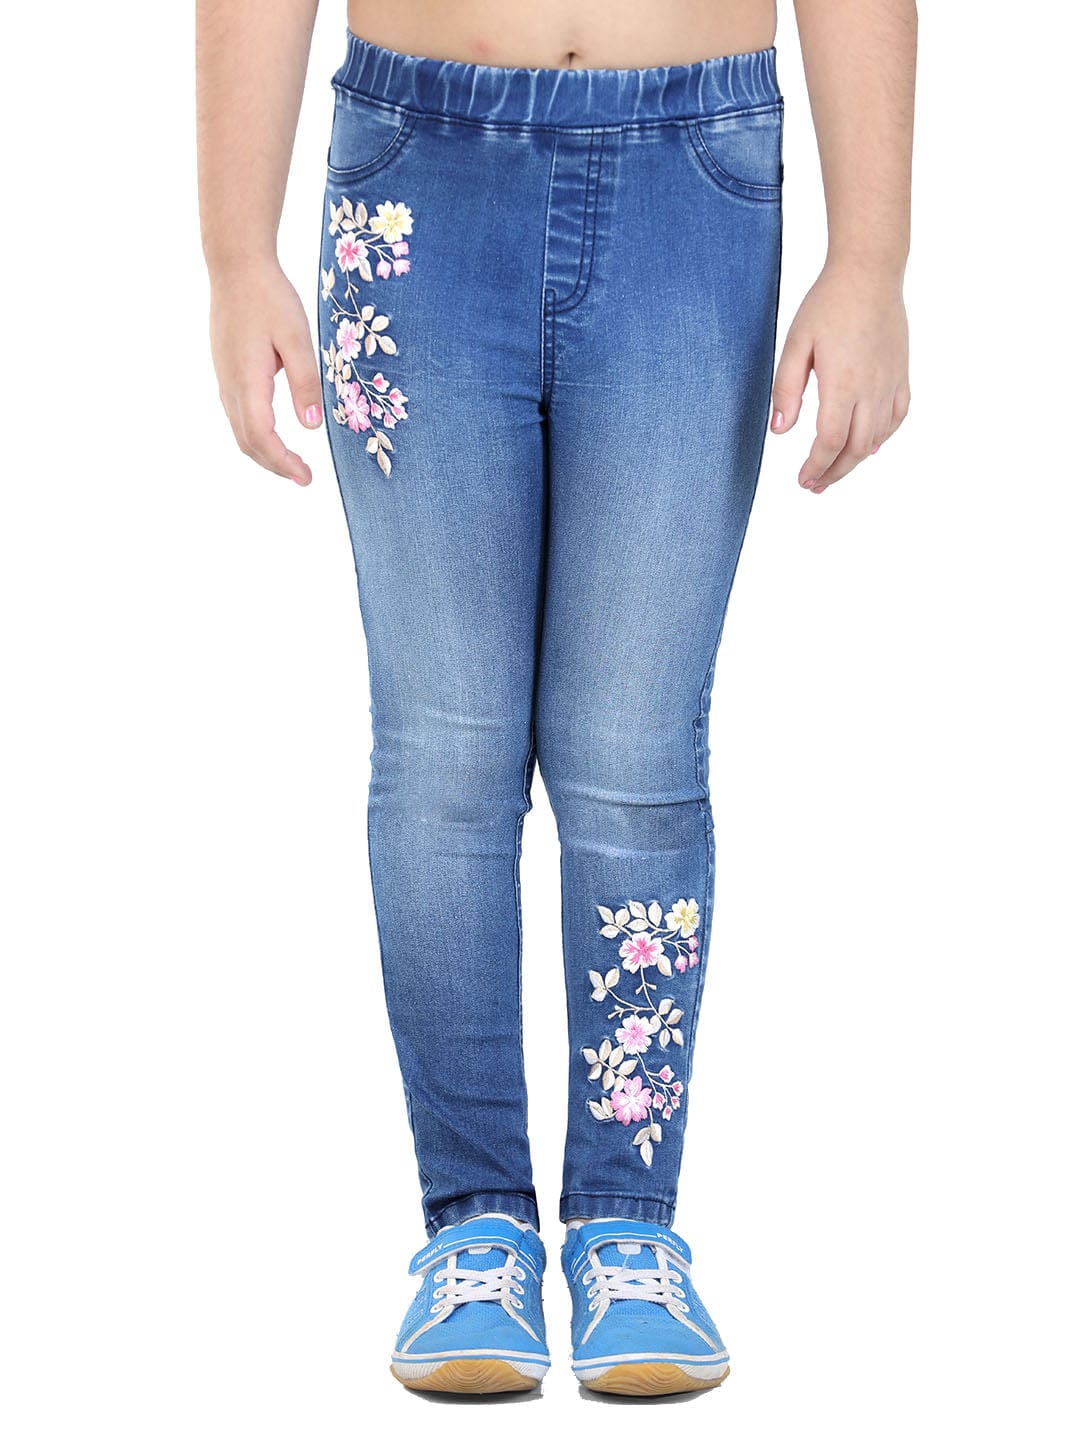 Buy Naughty Ninos Girls Blue Heavy Fade Embroidered Stretchable Jeans -  Jeans for Girls 16443466